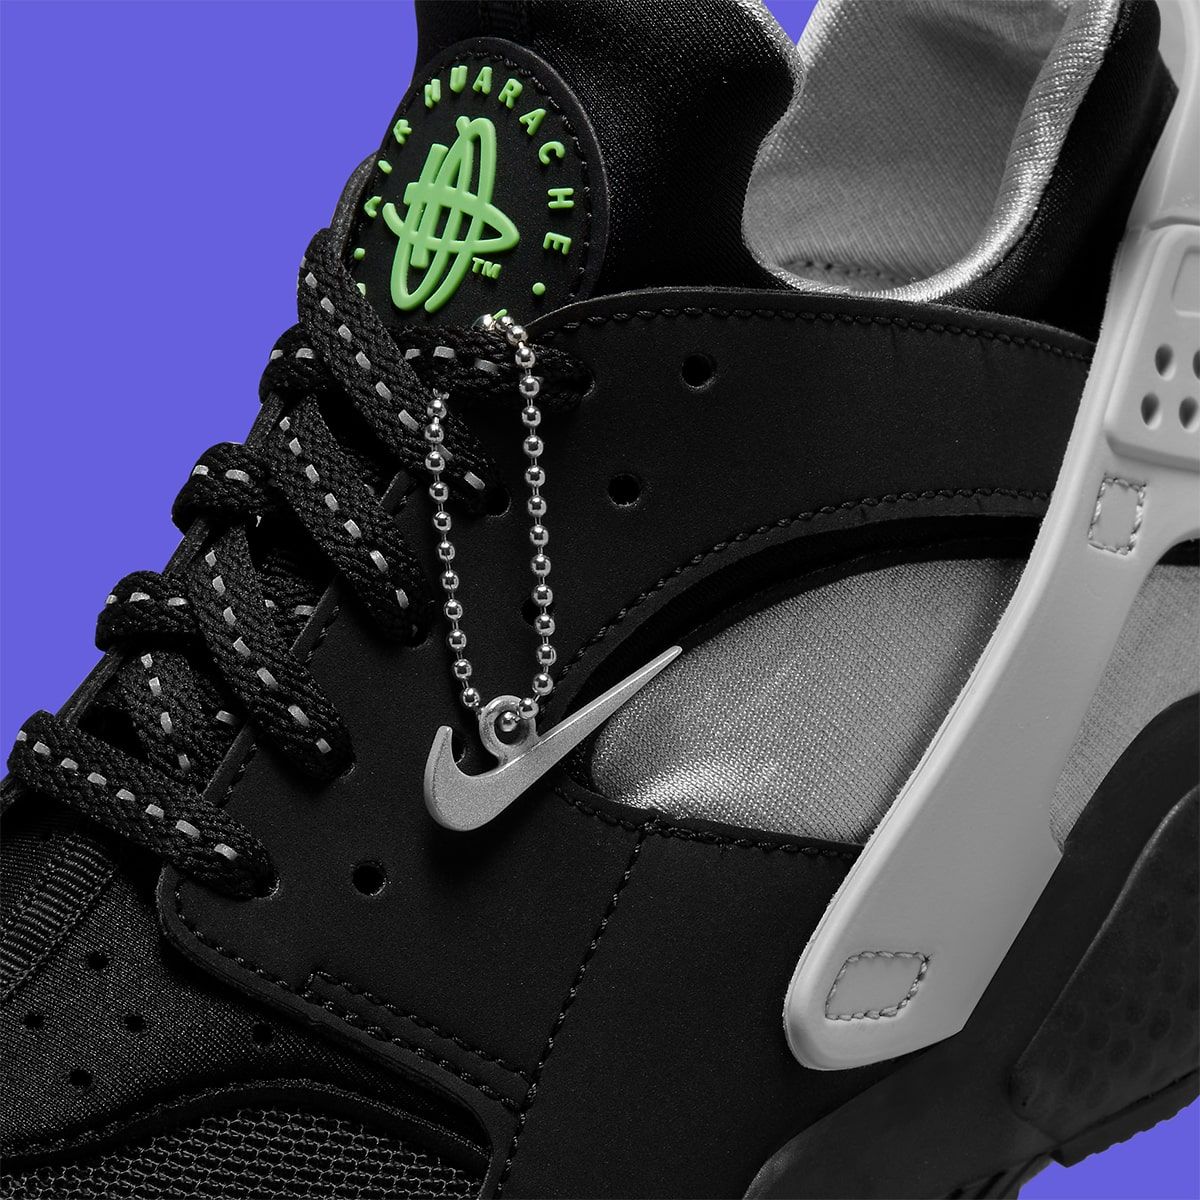 educate Joint None Nike Air Huarache "Black Neon" Appears! | HOUSE OF HEAT